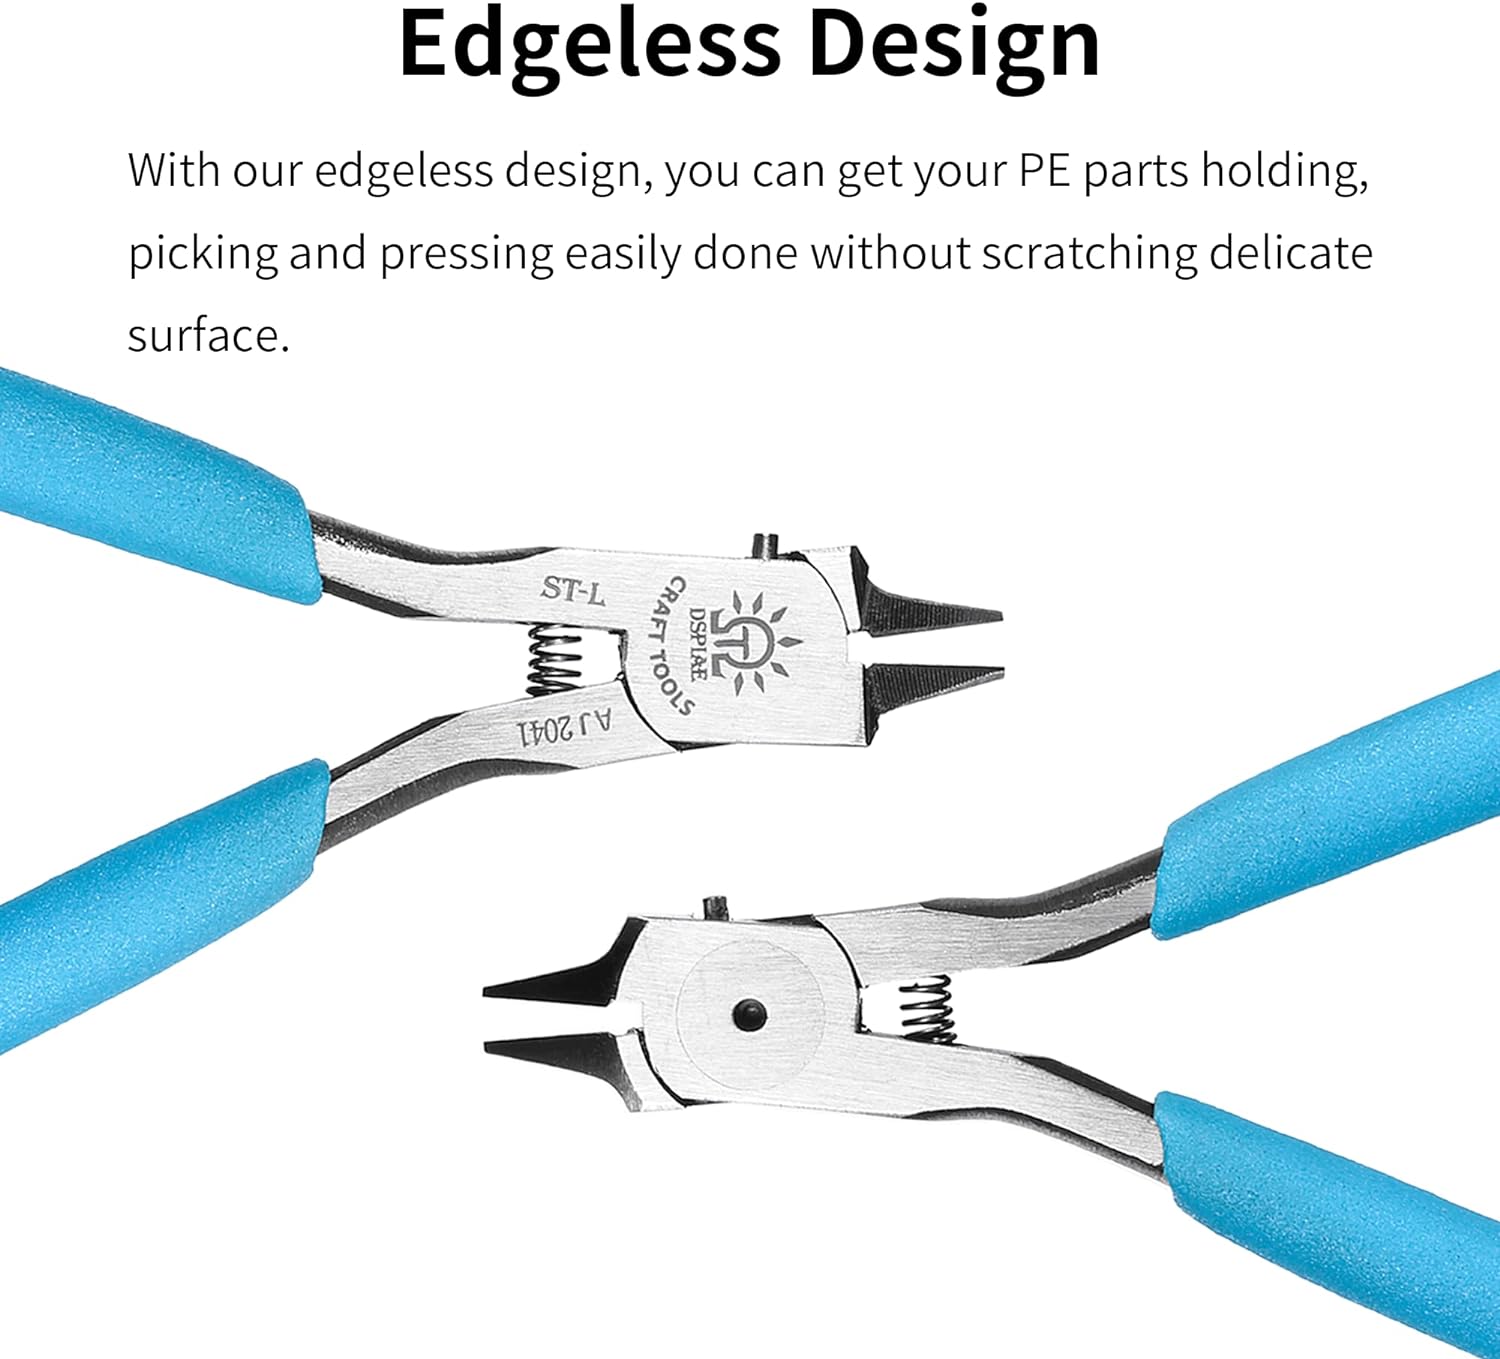 DSPIAE Ultimate Bladeless Pliers - Model Building Tools and Accessories (for Plastic or Photo Etch)